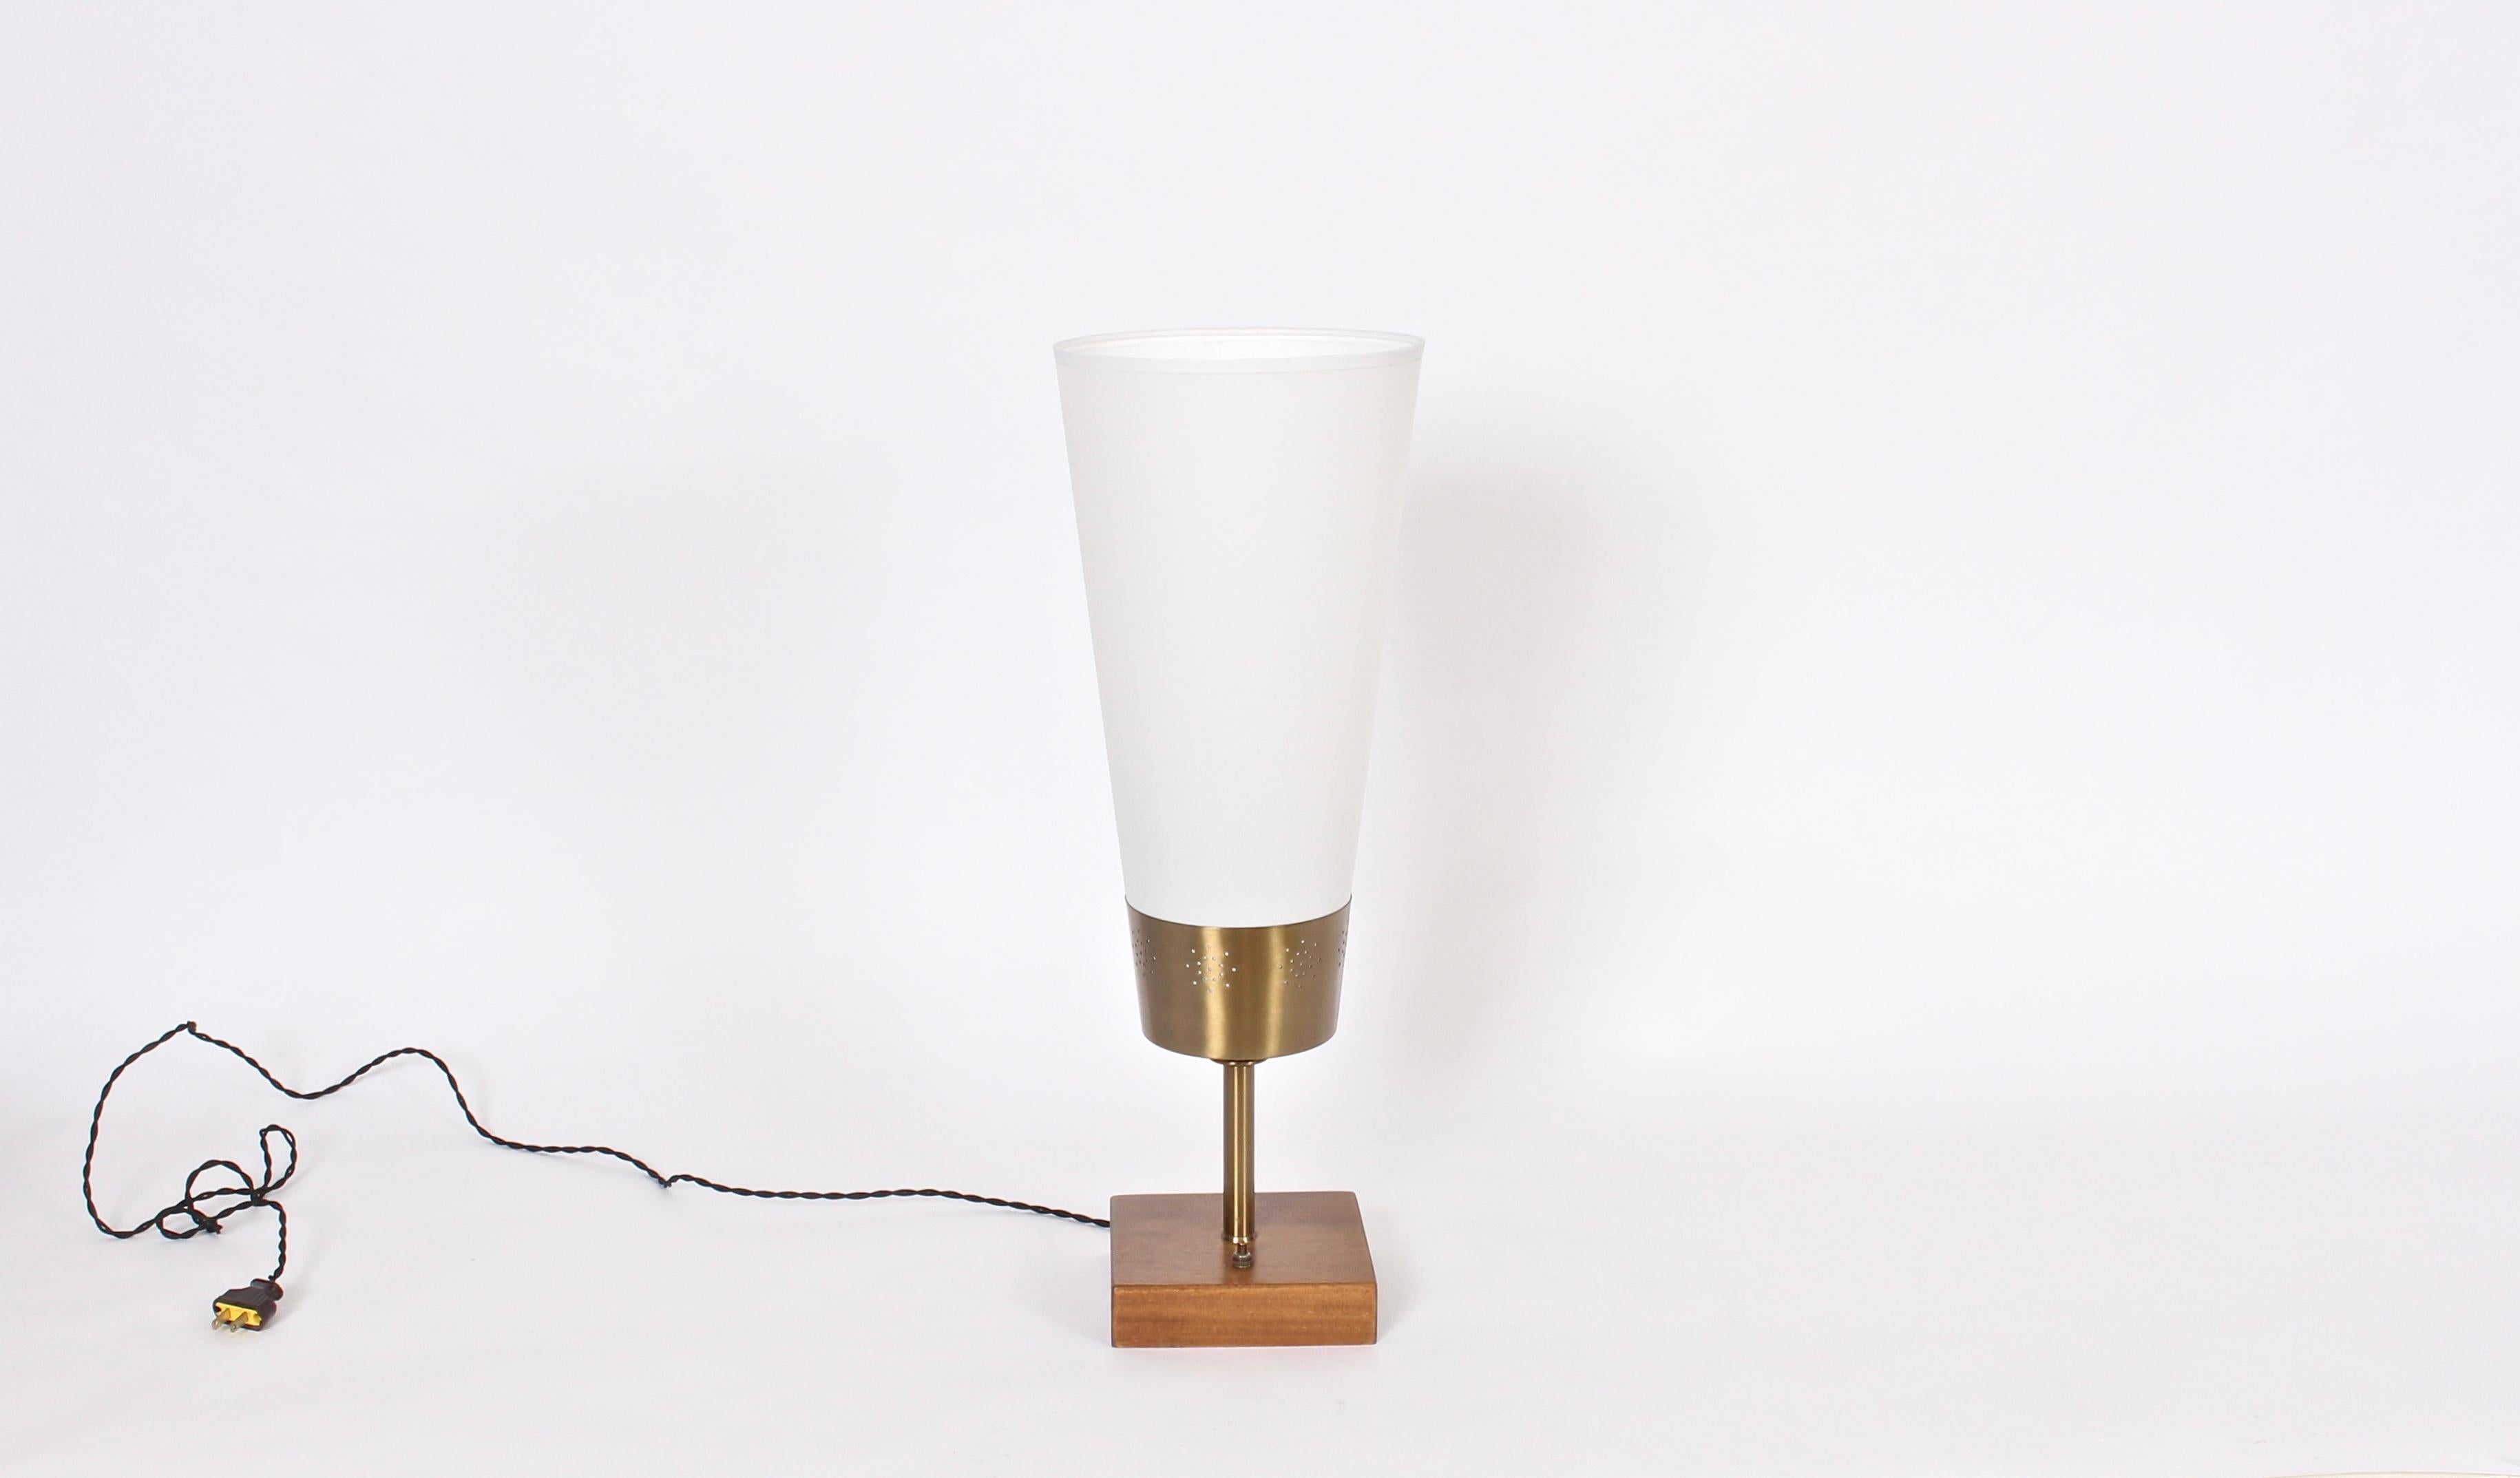 Yasha Heifetz mahogany, brass and parchment table lamp, 1940s. Featuring a round pierced illuminating brass container, newly recovered cone parchment shade (16 H x 4.5 D top x 8 D bottom) on a square refinished mahogany base. Rewired with black